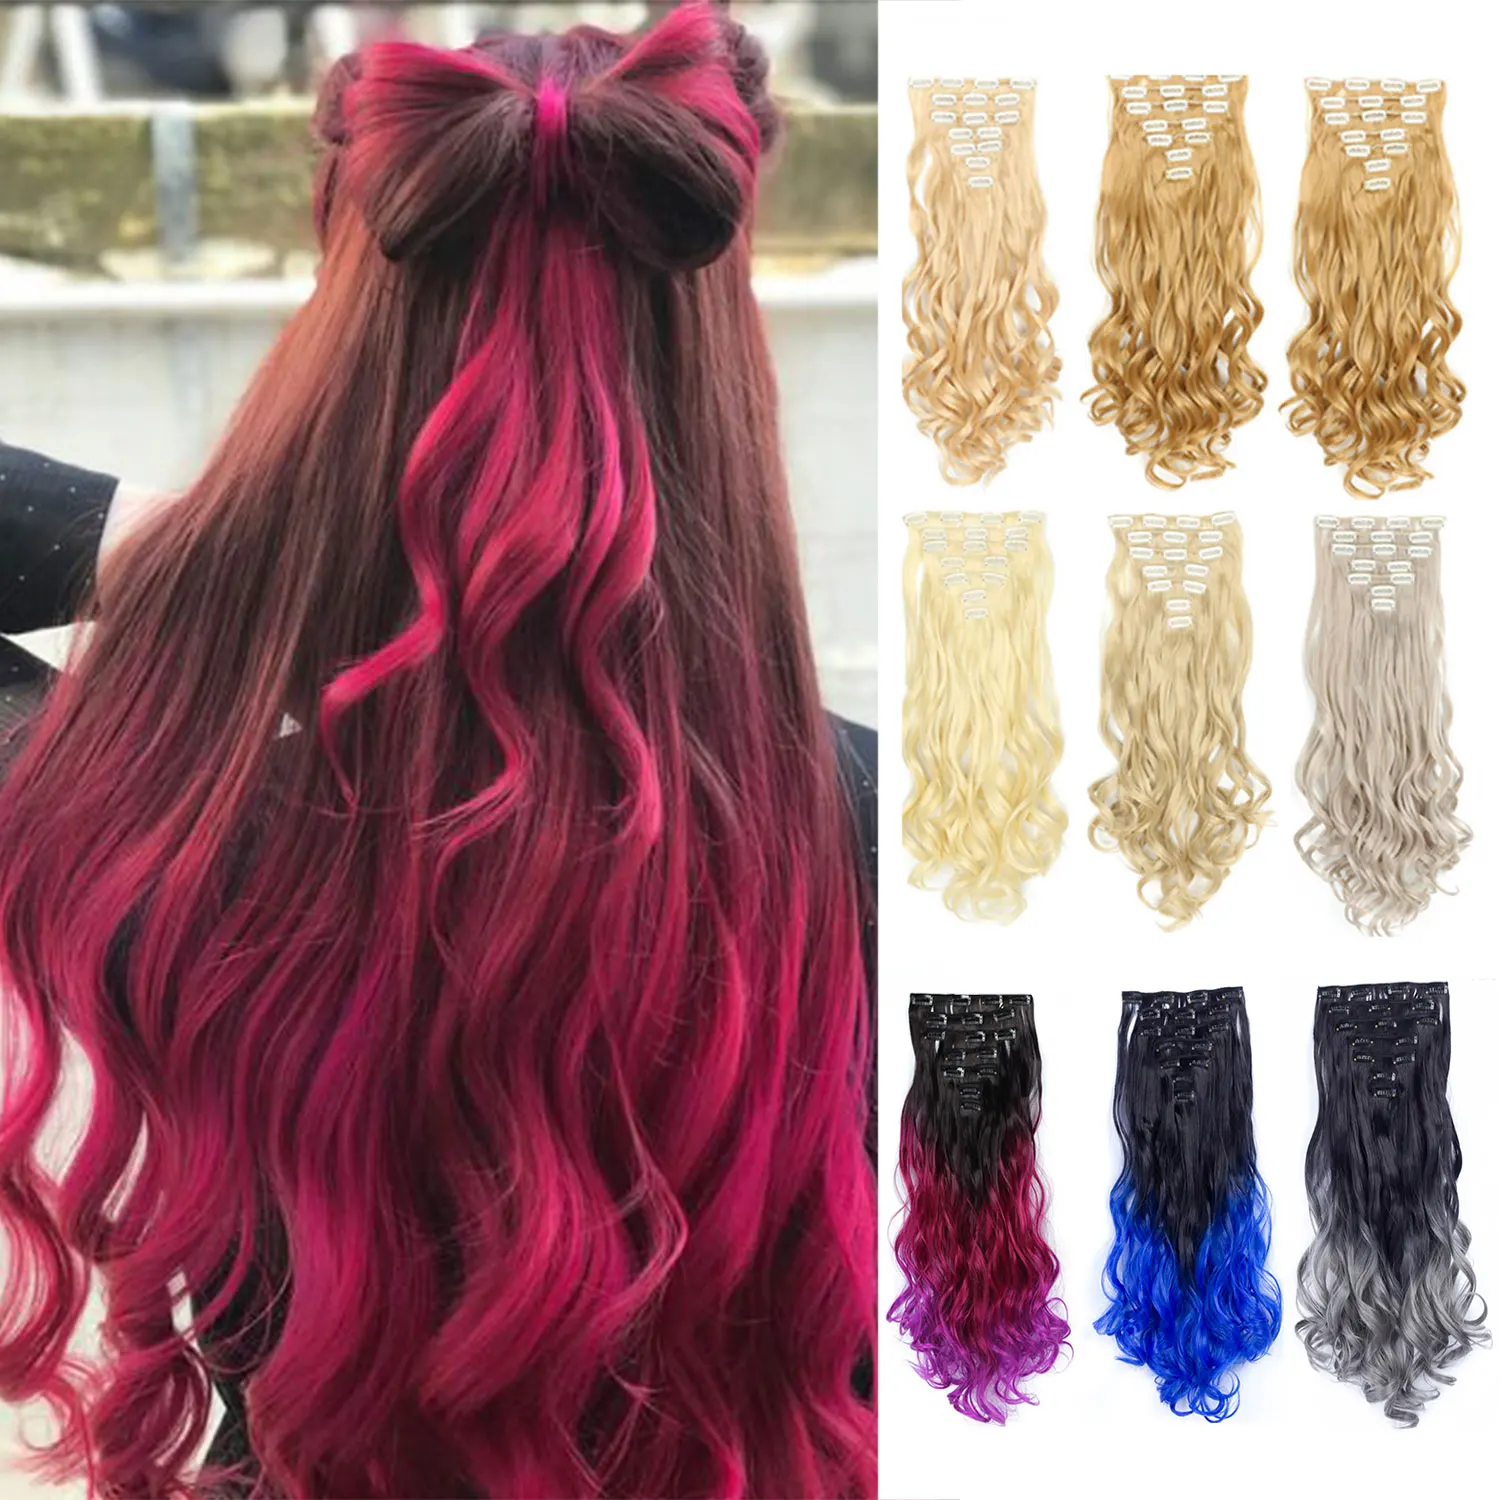 

24Inchs 16 Clips in Hair Extensions Long Straight Hairstyle Synthetic Blonde Black Hairpieces Heat Resistant False Hair